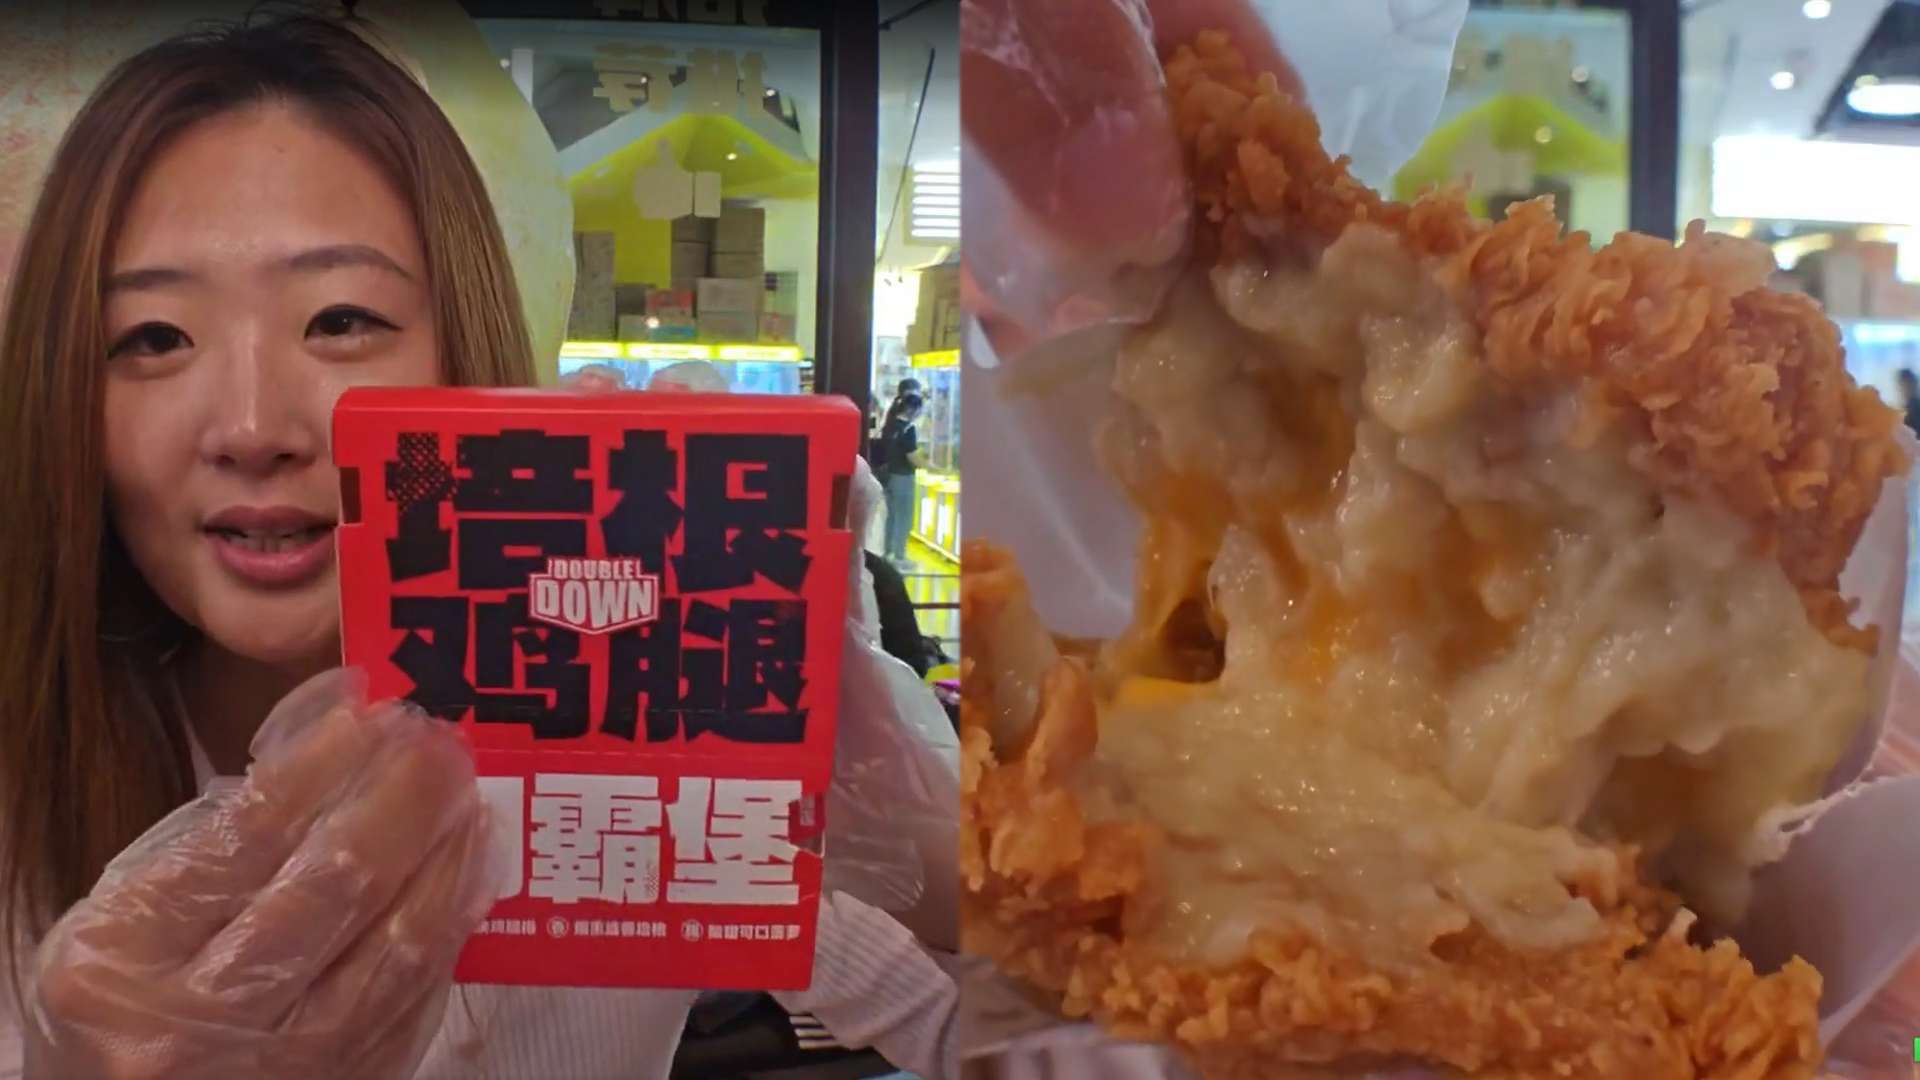 The streamer GeezGiselle alongside a picture of KFC's Durian Double Down